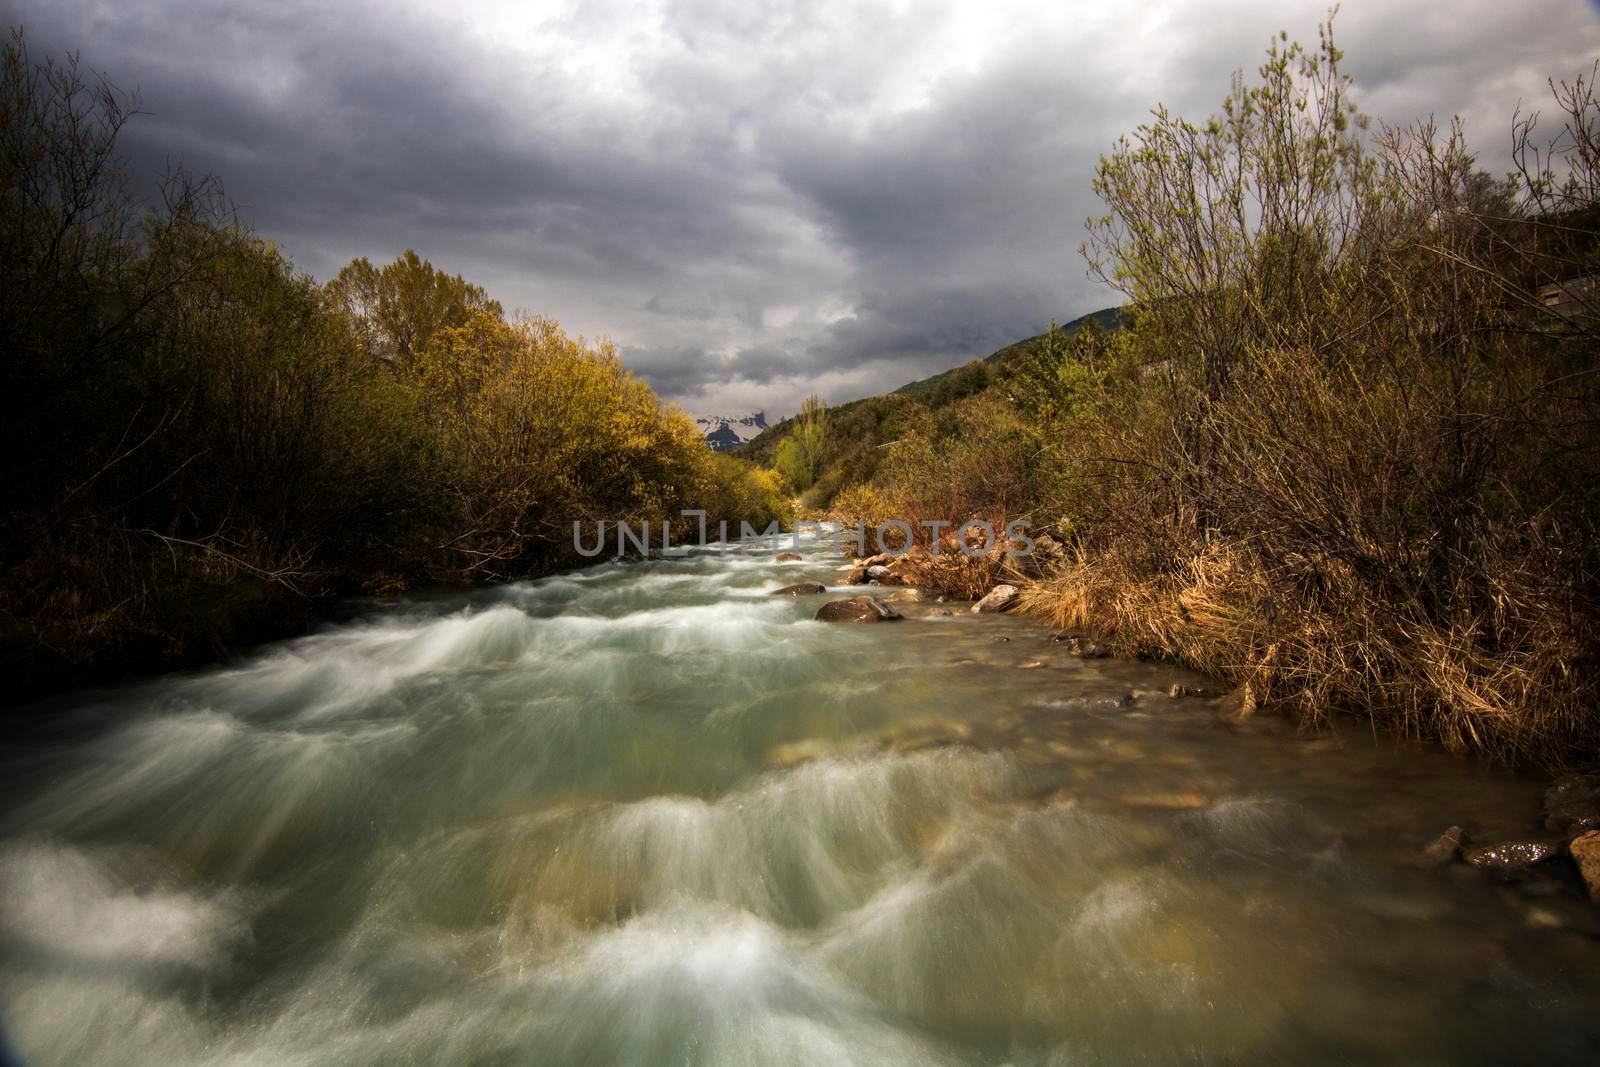 Wild river under a cloudy sky in long exposure picture in Spanish Pyrenees